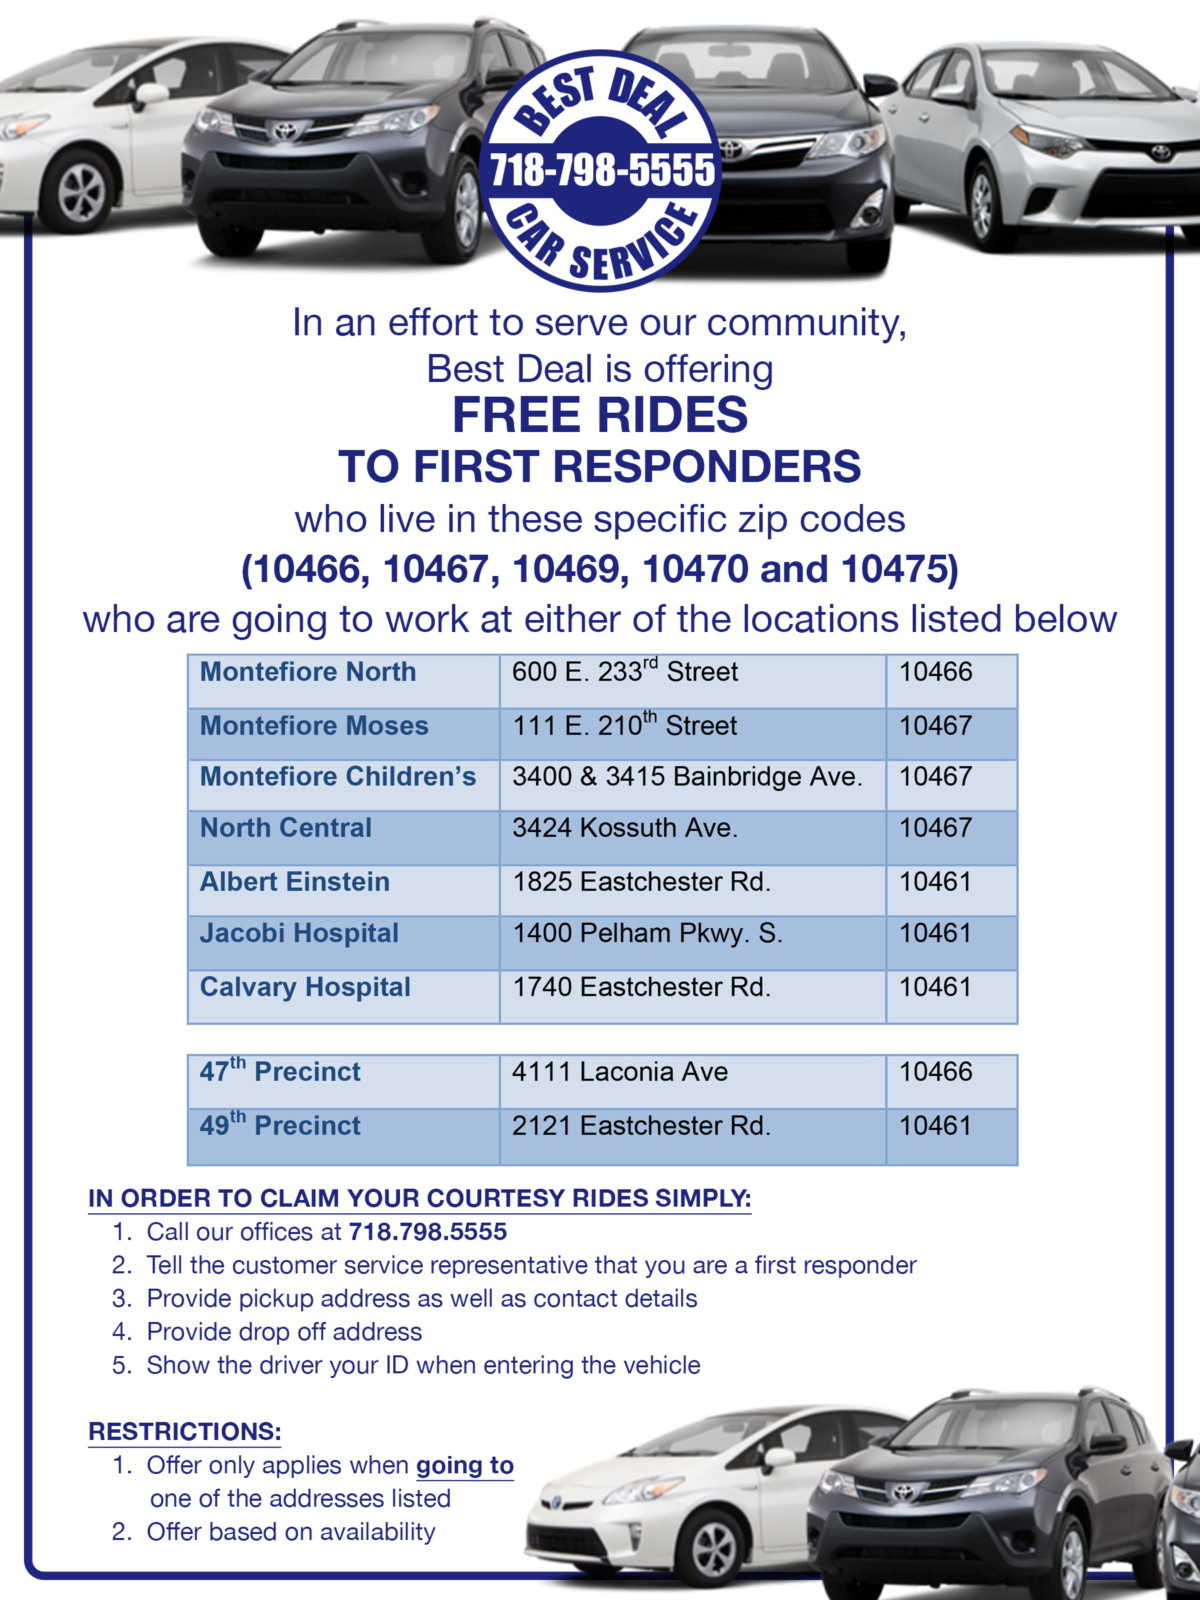 Best Deal Car Service Offering FREE Rides to First Responders due to COVID-19